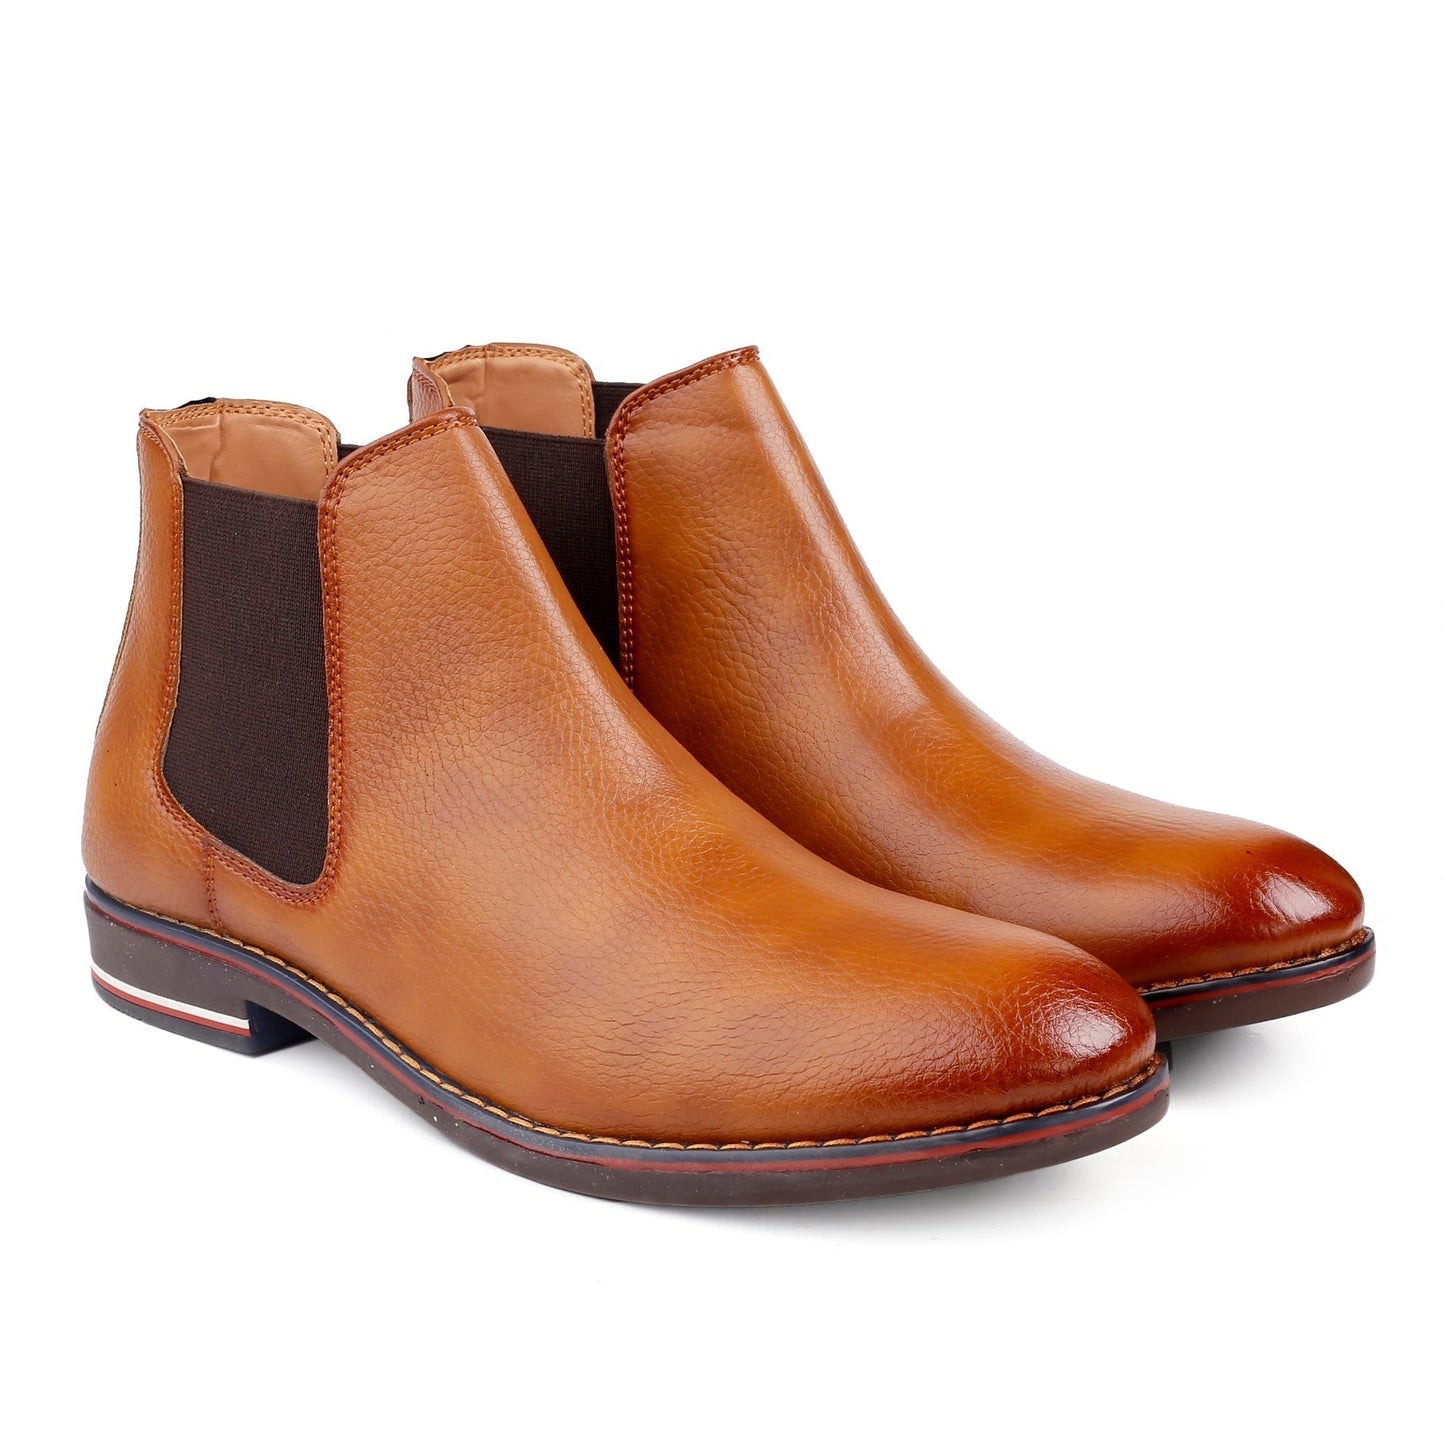 New Chelsea Tan Boot For Men Party And Casual Wear -JackMarc